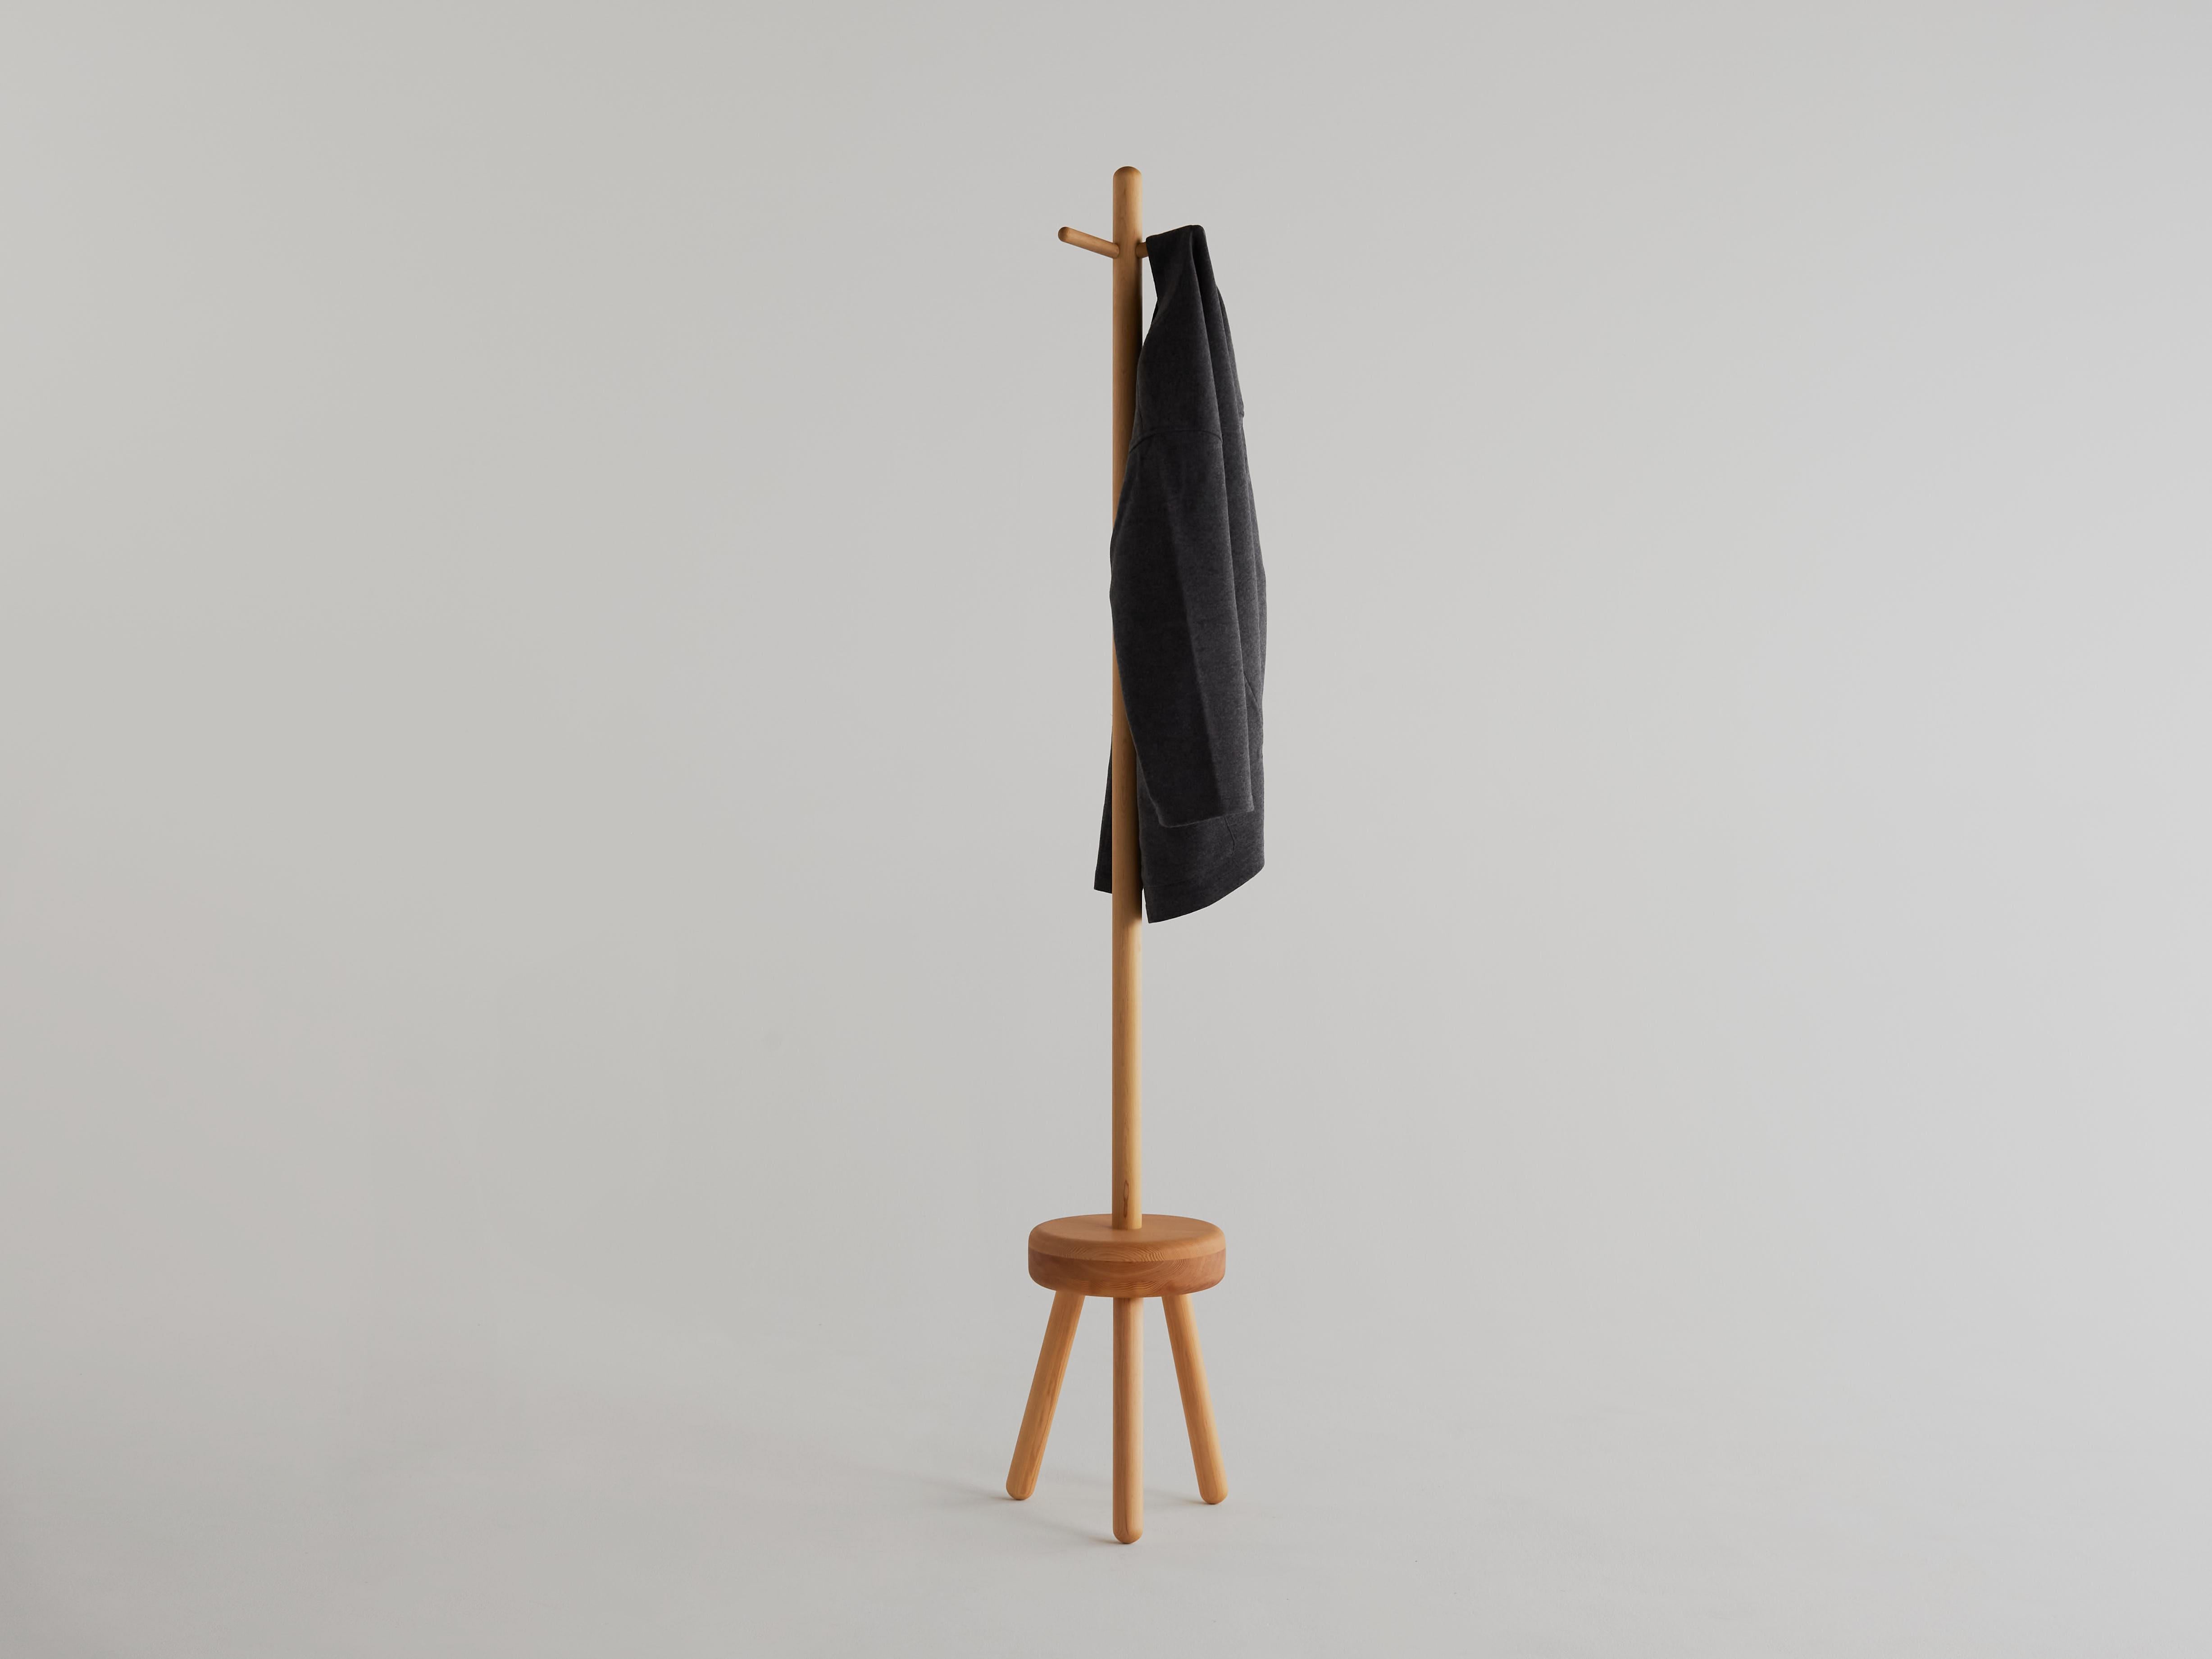 Modern Peg Coat Rack by Campagna, Playful Shaker Inspired Minimal Wooden Coat Stand